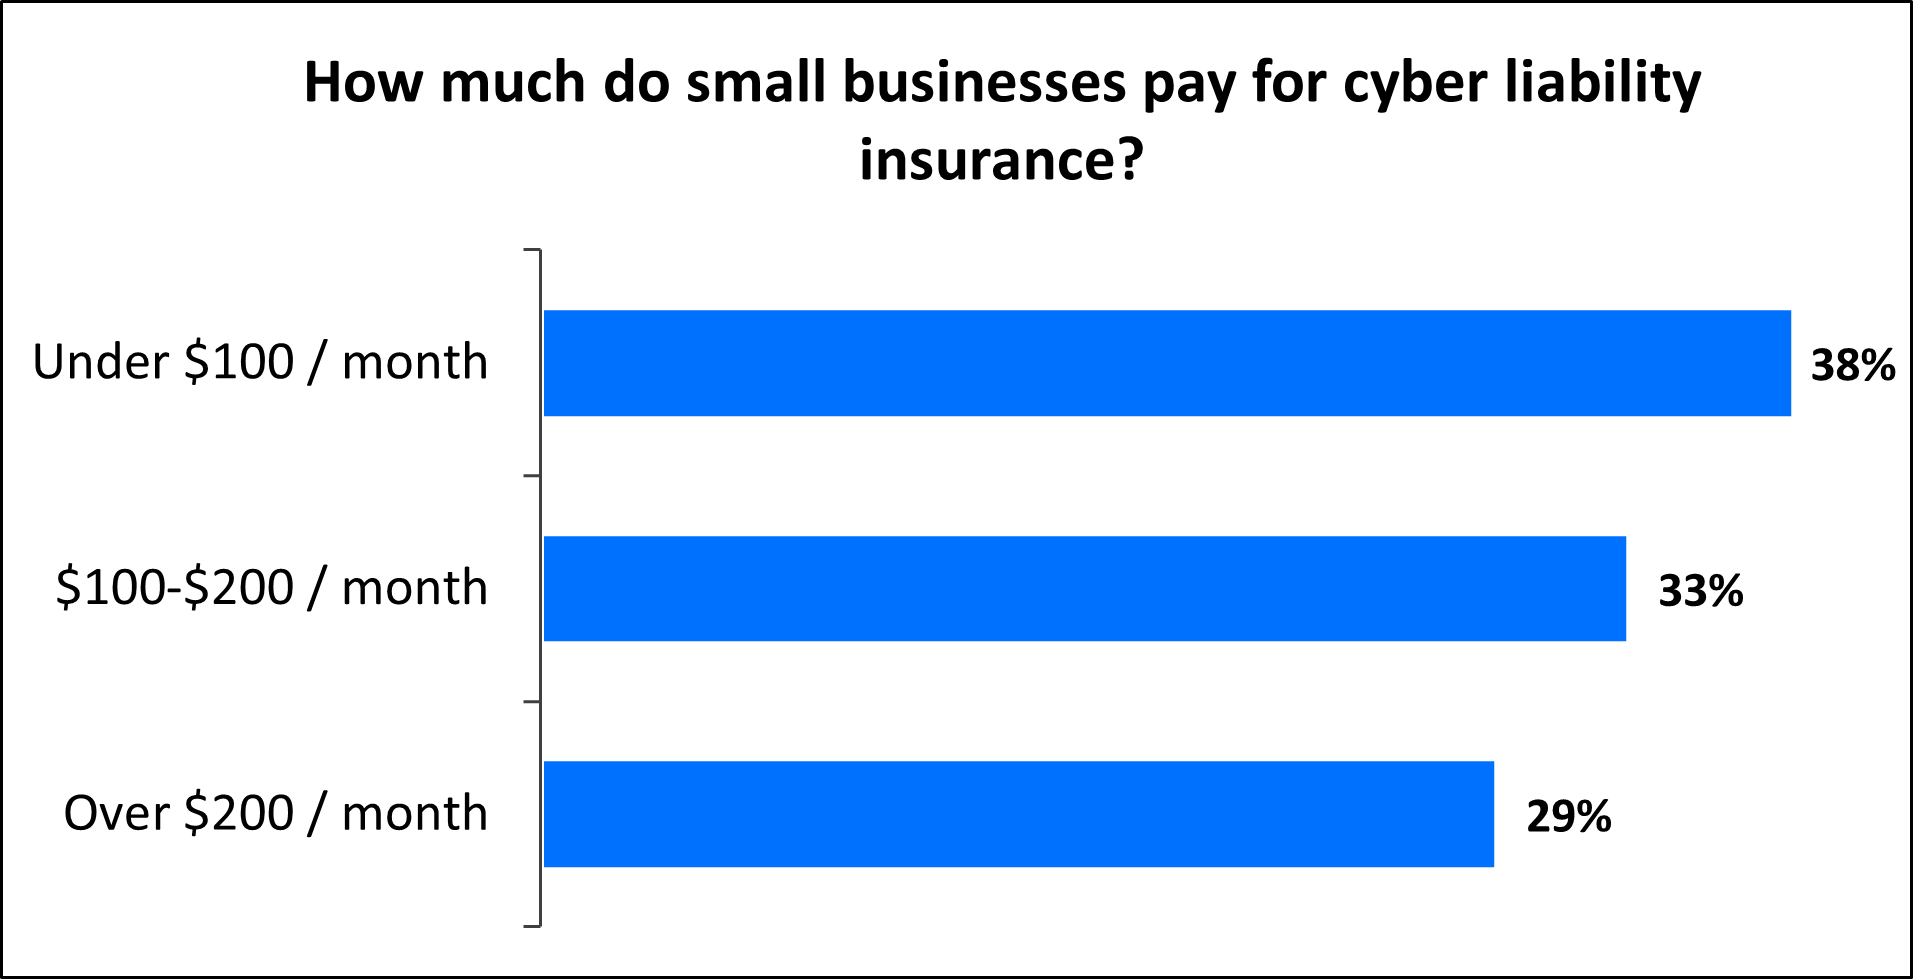 How much do small businesses pay for cyber liability insurance?